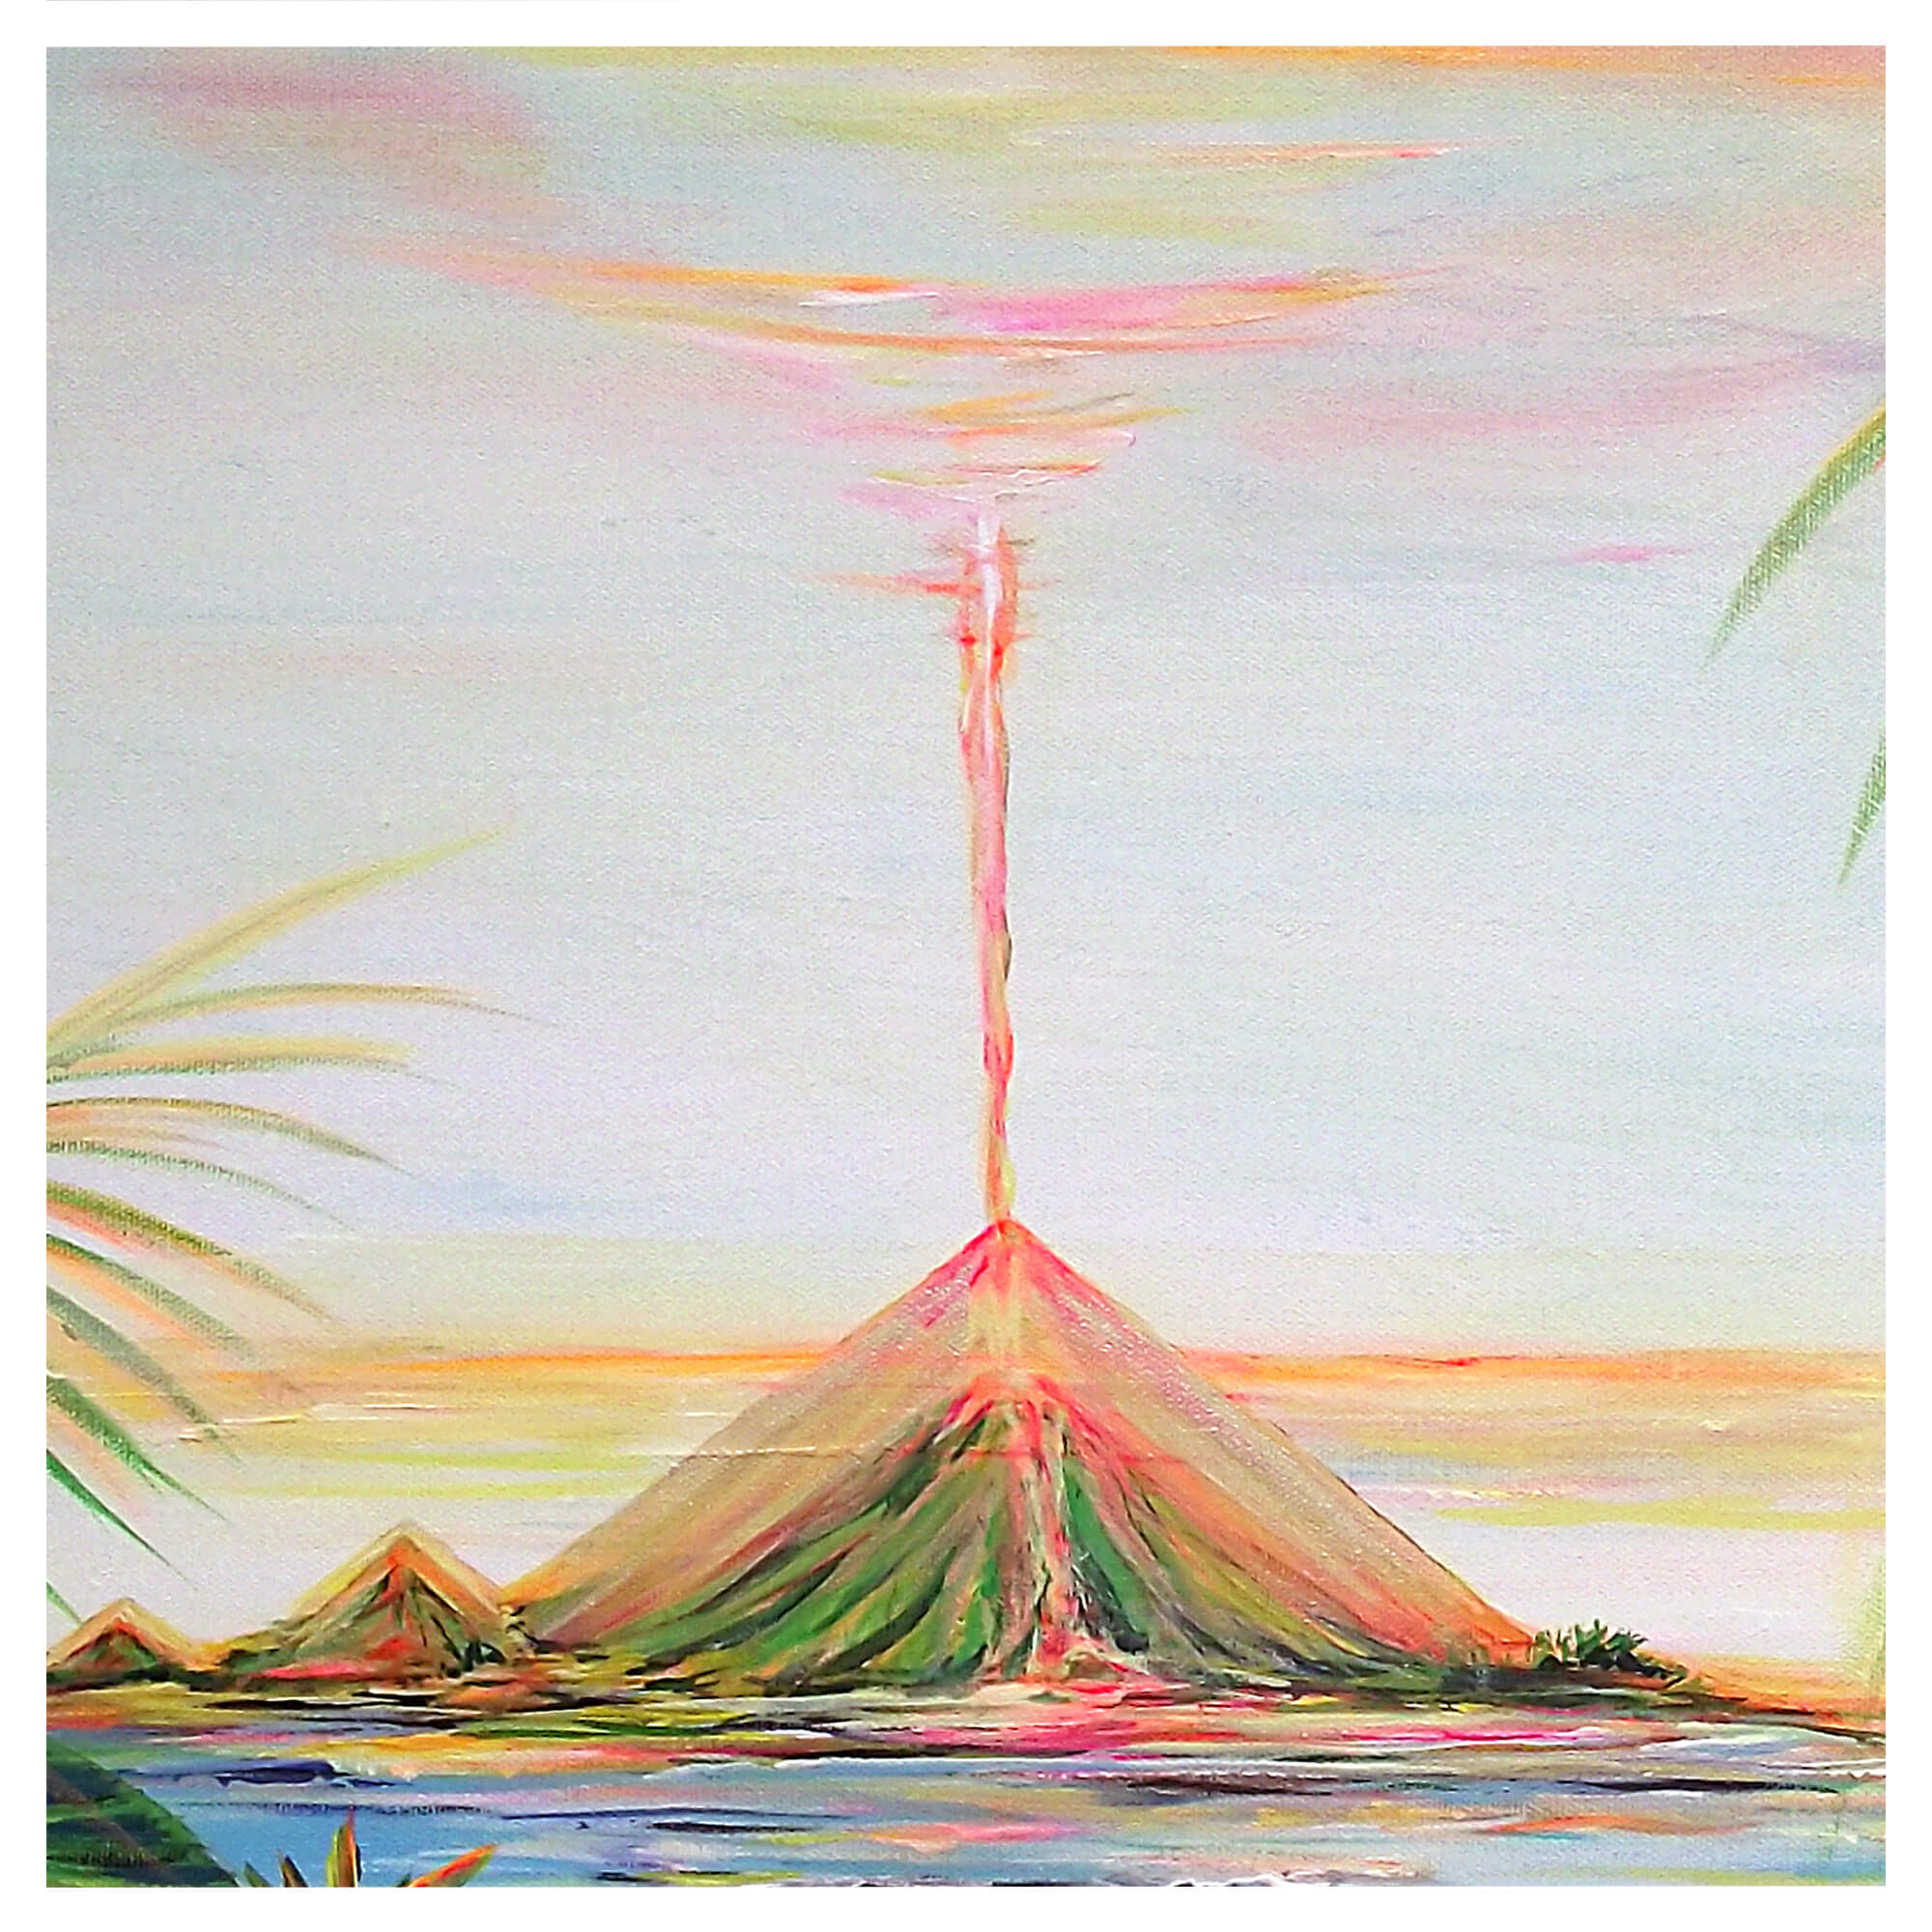 A green and pink colored erupting volcano by Hawaii artist Jess Burda